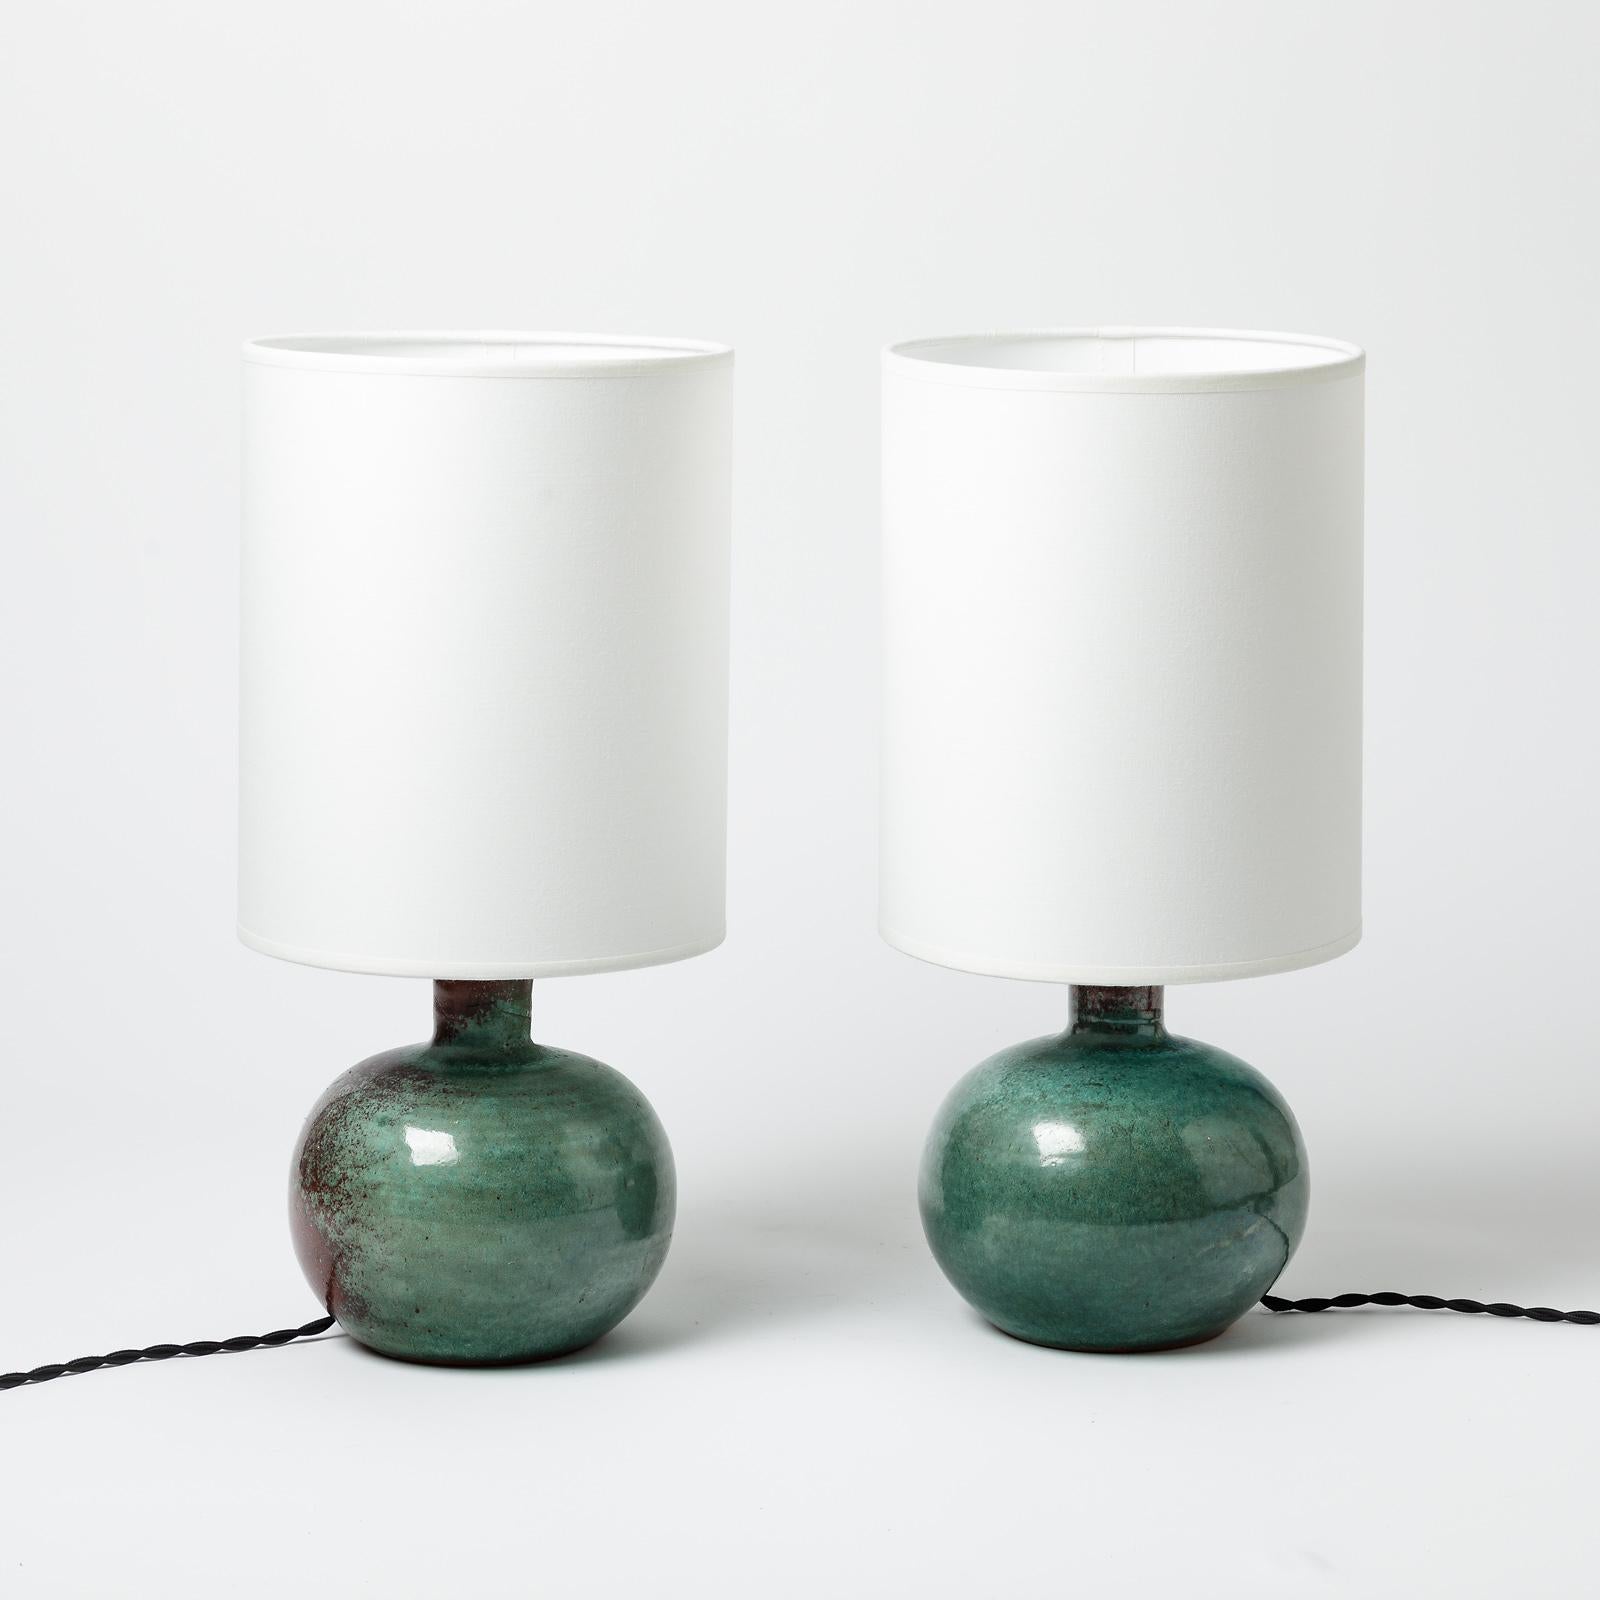 A pair of ceramic table lamps with green and red glaze decoration by La Borne Potters.
Sold with a new lamp shaded new european electrical system
Perfect original conditions.
Signed under the base.
Circa 1960-1970.
Dimensions :
- Ceramic only